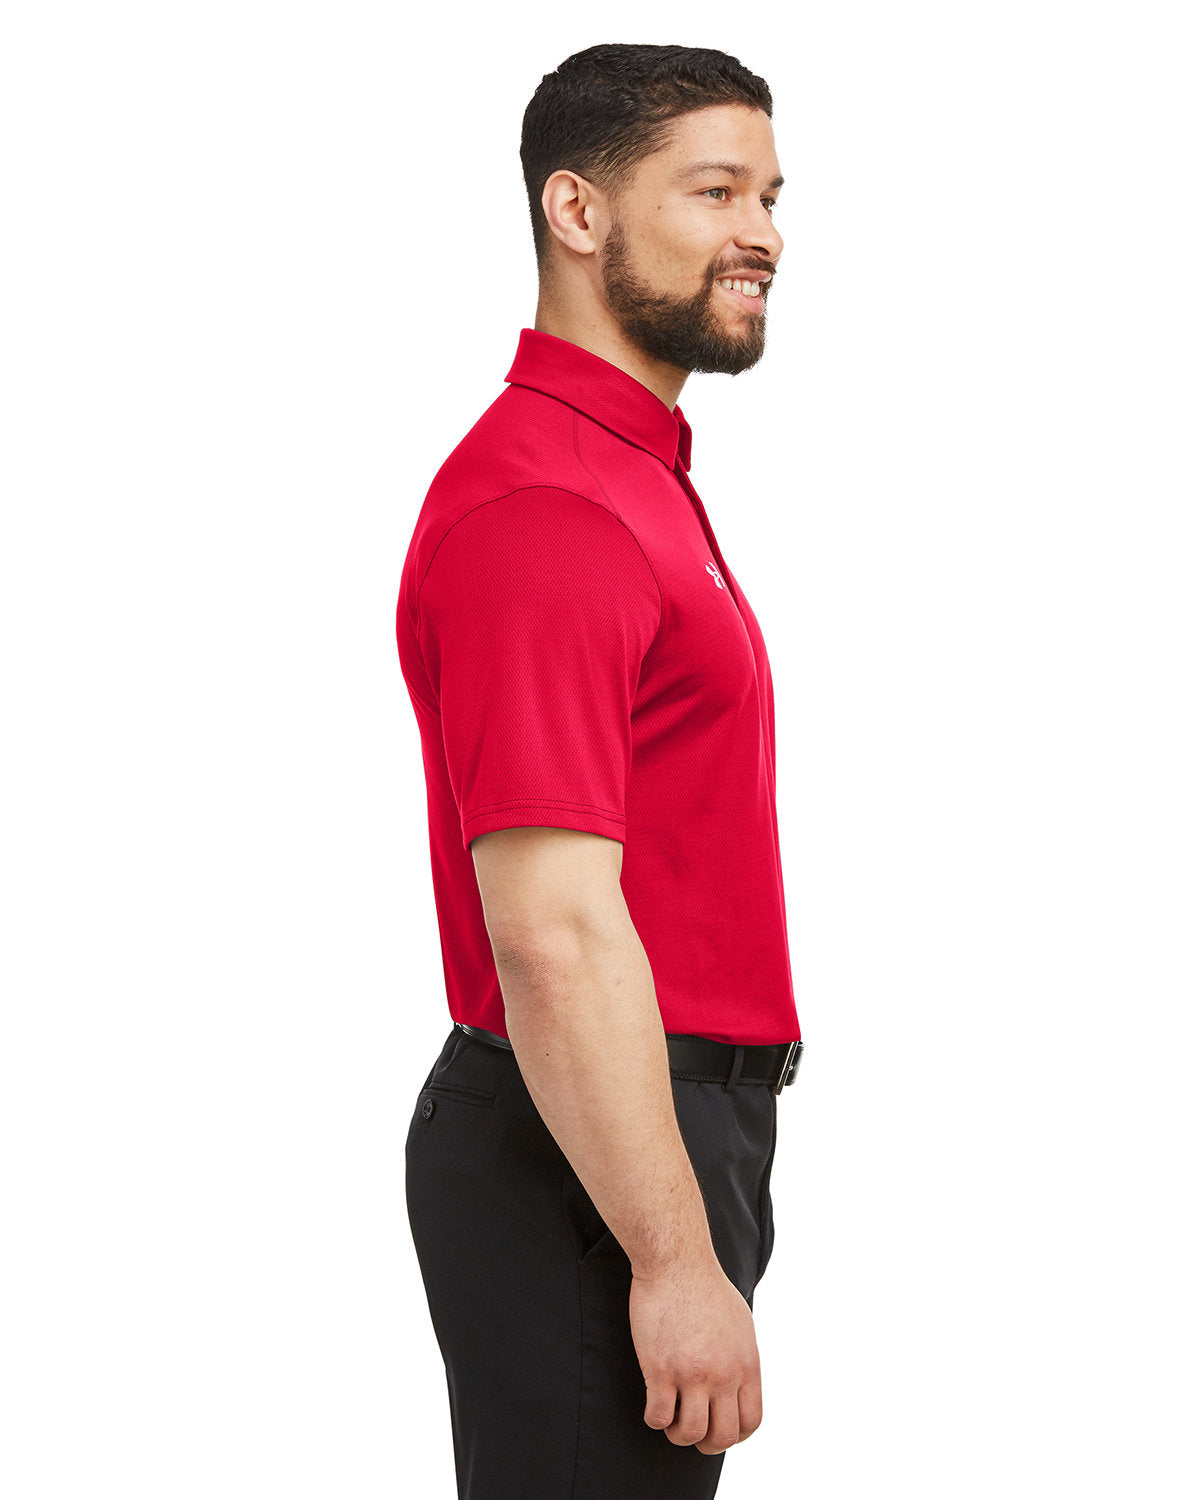 Under Armour Men's Tech Customized Polos, Red